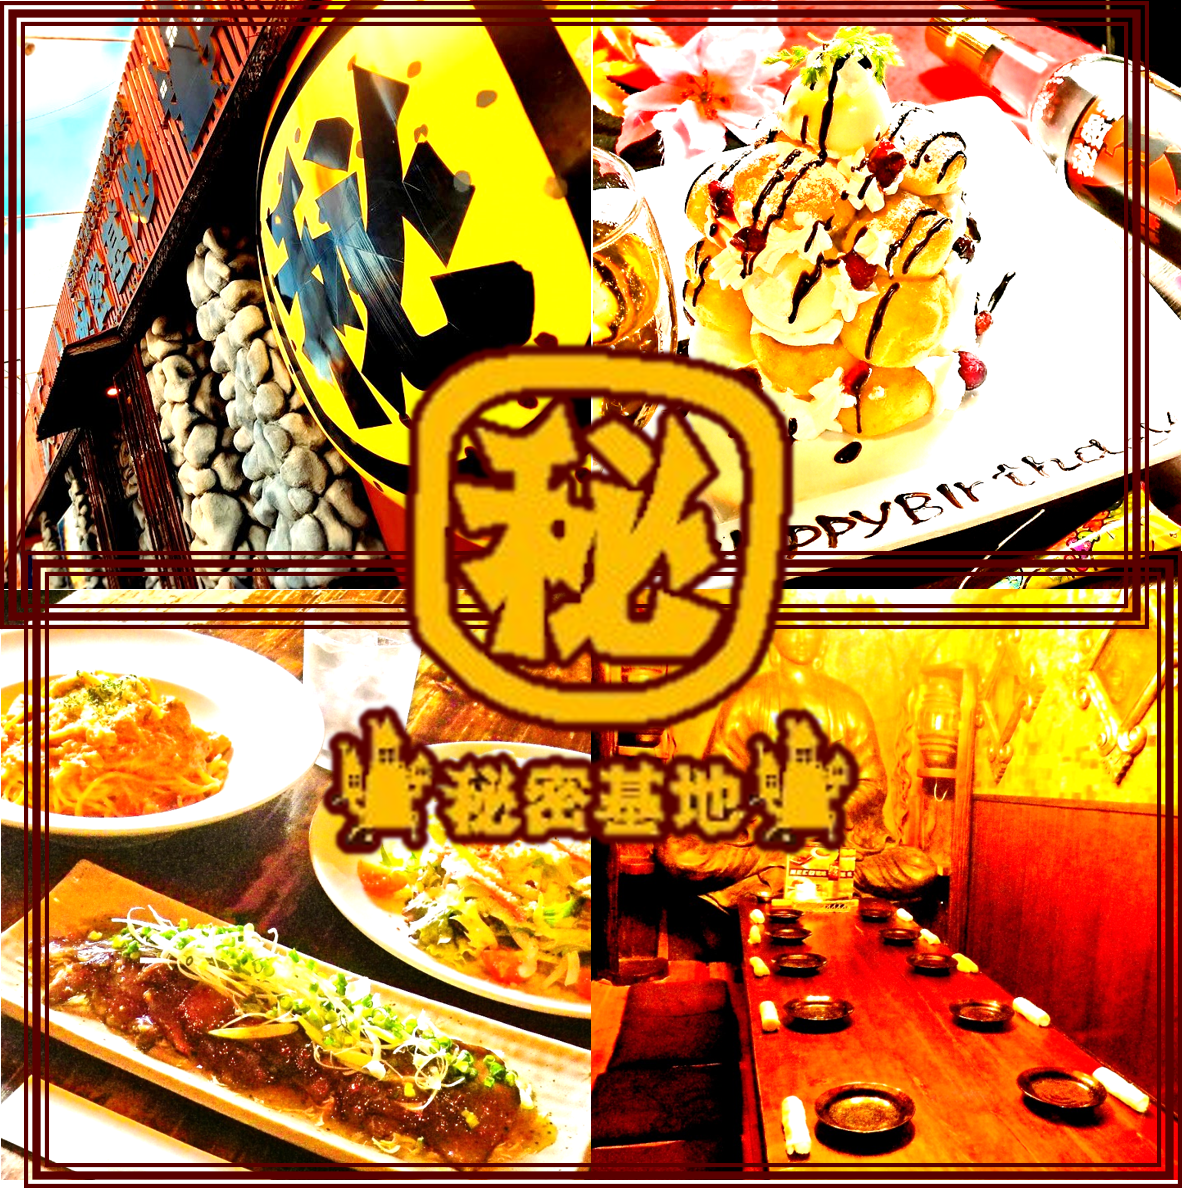 As the name suggests, it's a hideaway izakaya! It's perfect for eating and drinking cheerfully ★